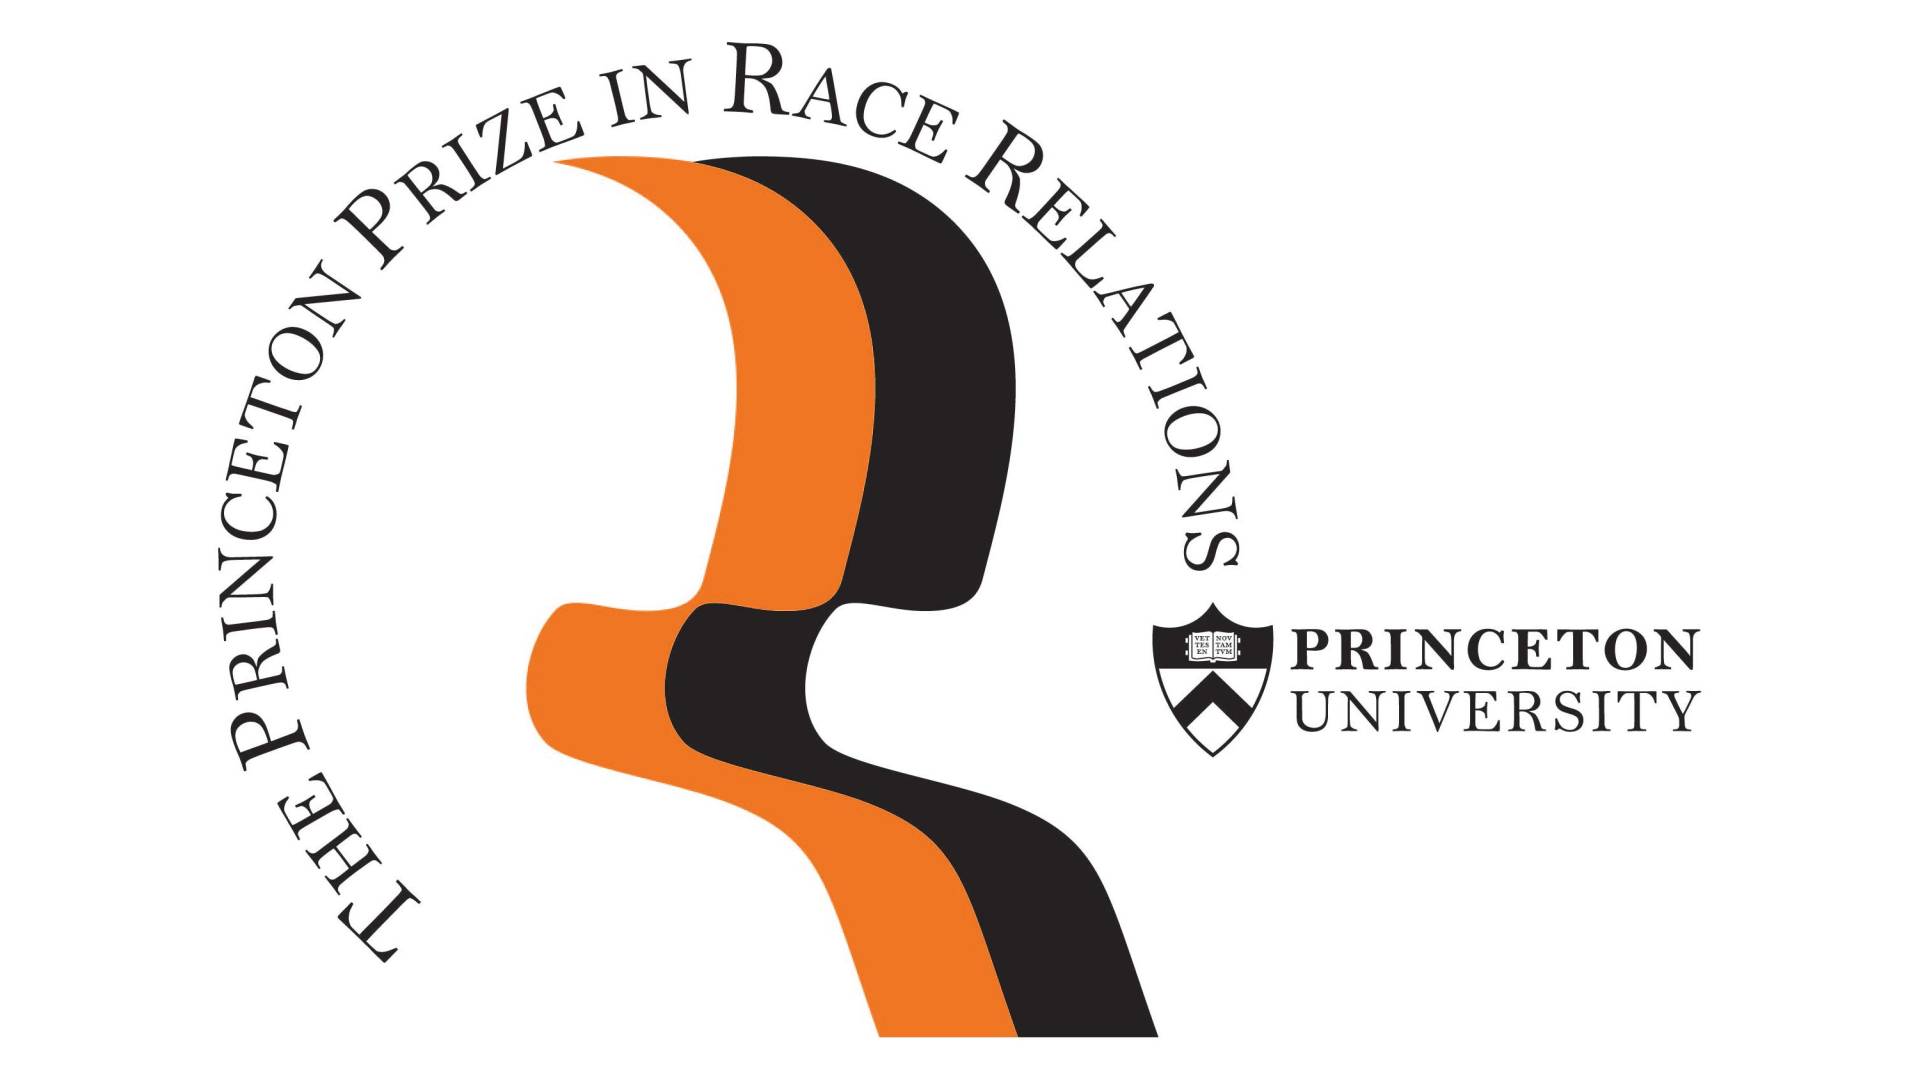 Princeton Prize in Race Relations logo